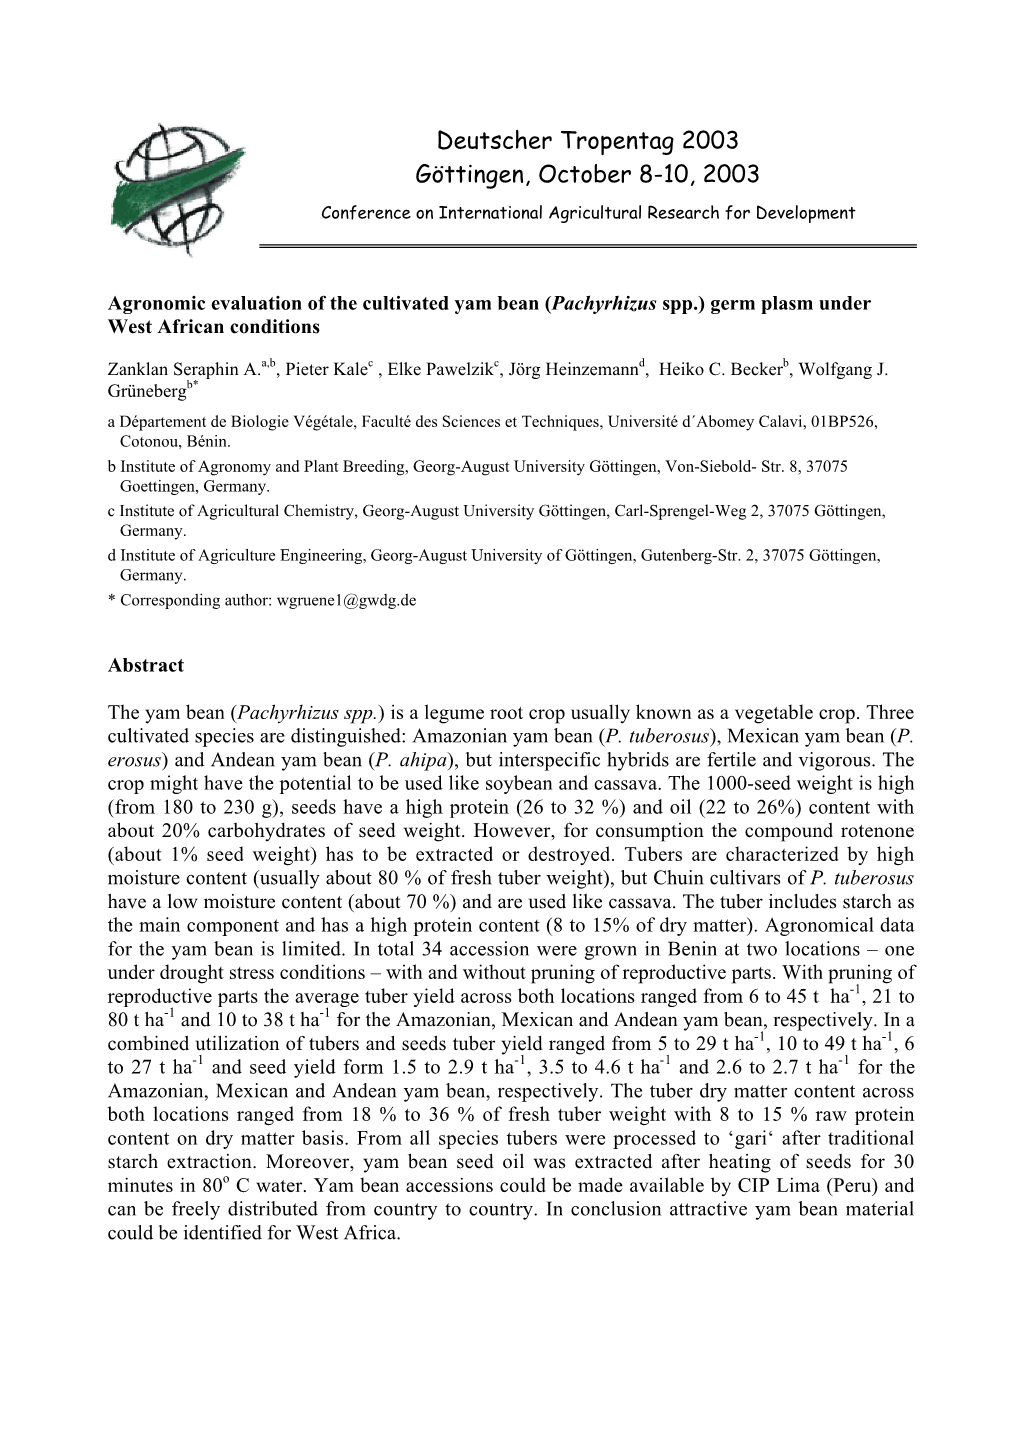 Agronomic Evaluation of the Cultivated Yam Bean (Pachyrhizus Spp.) Germ Plasm Under West African Conditions